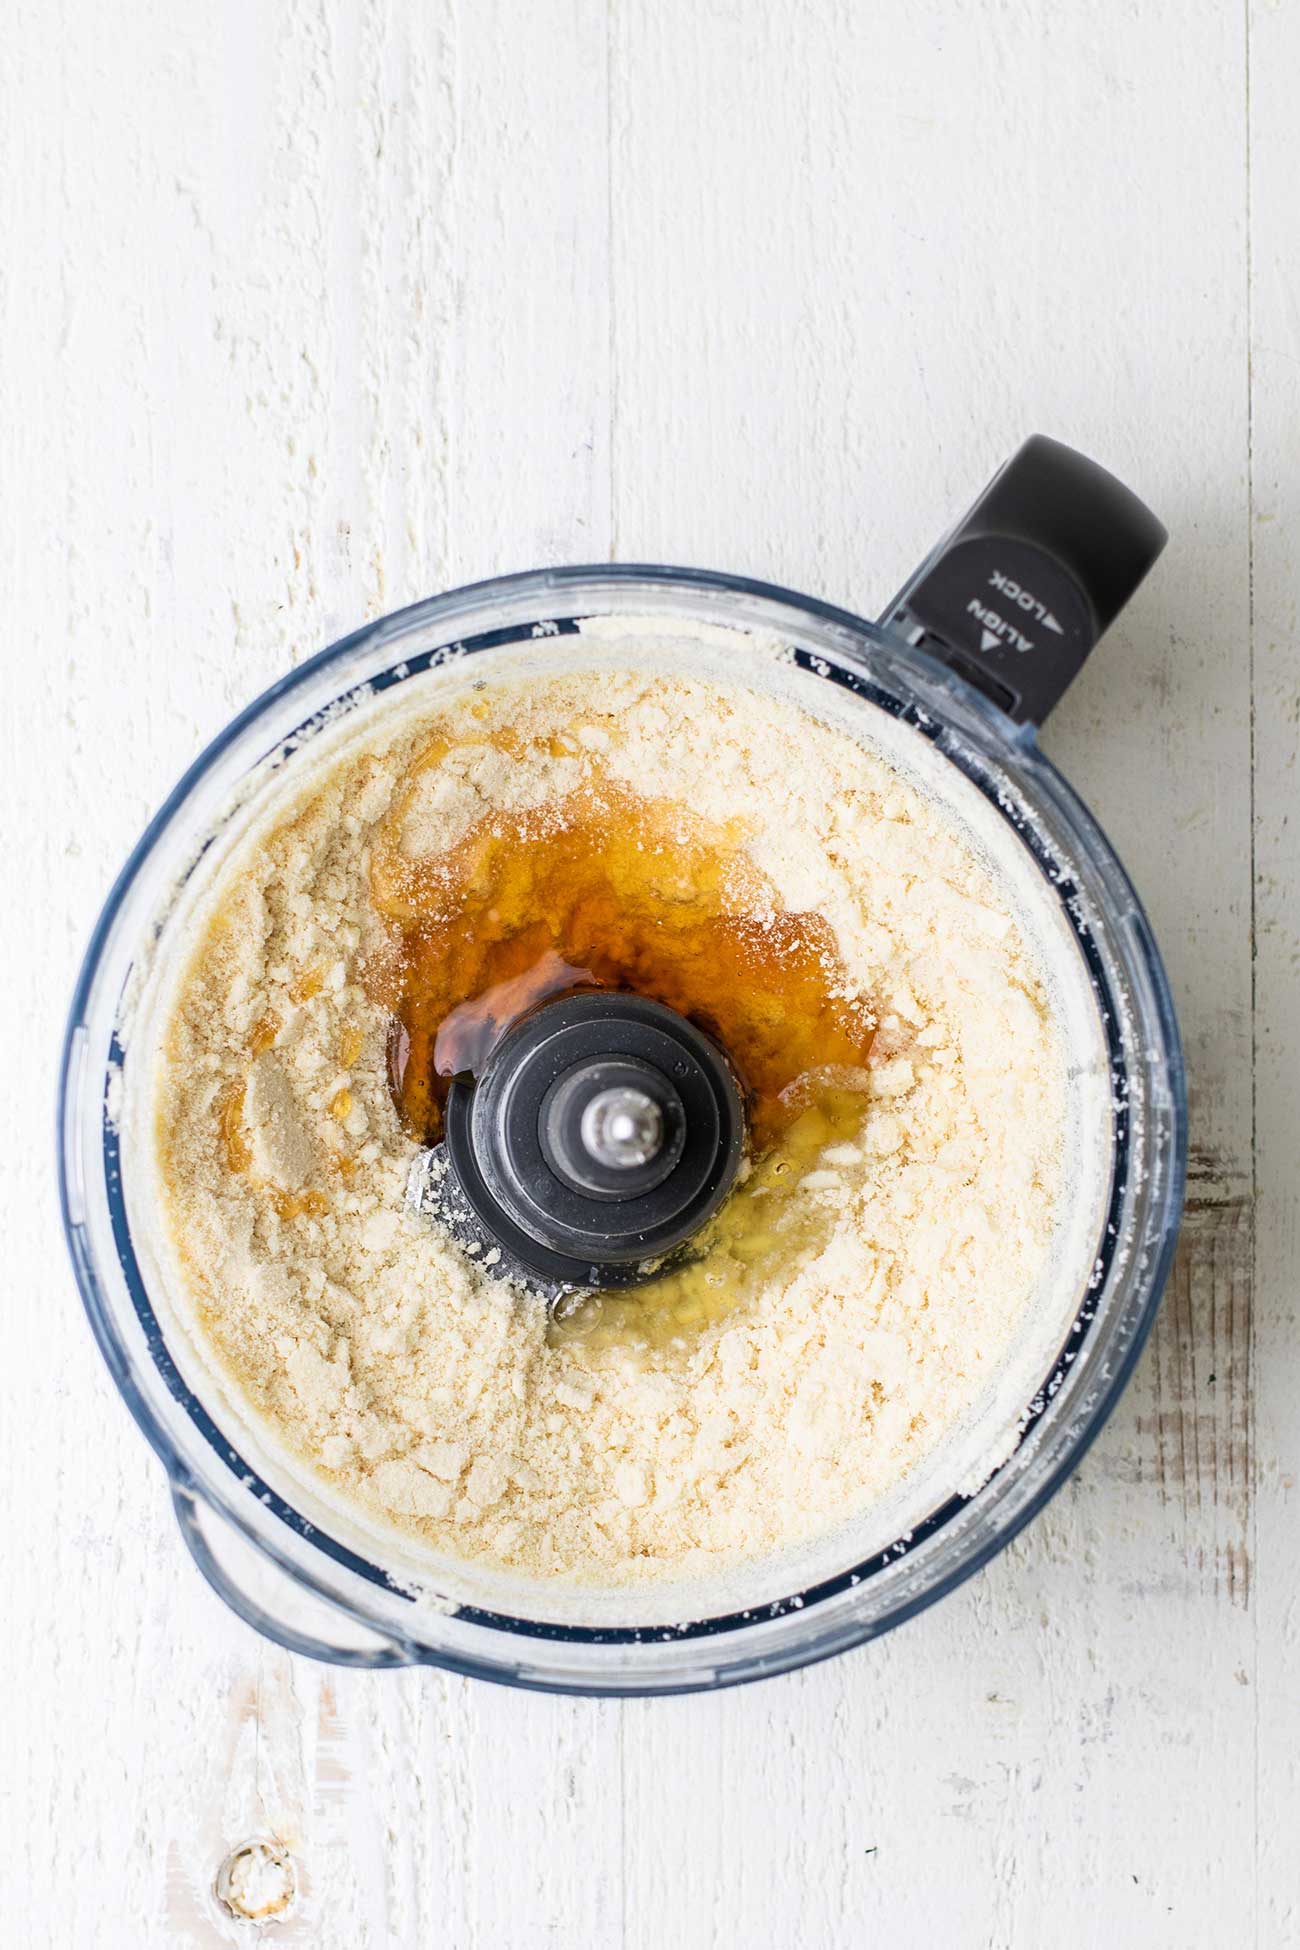 The food processor bowl with the butter and almond flour mixture, with honey and egg white added.